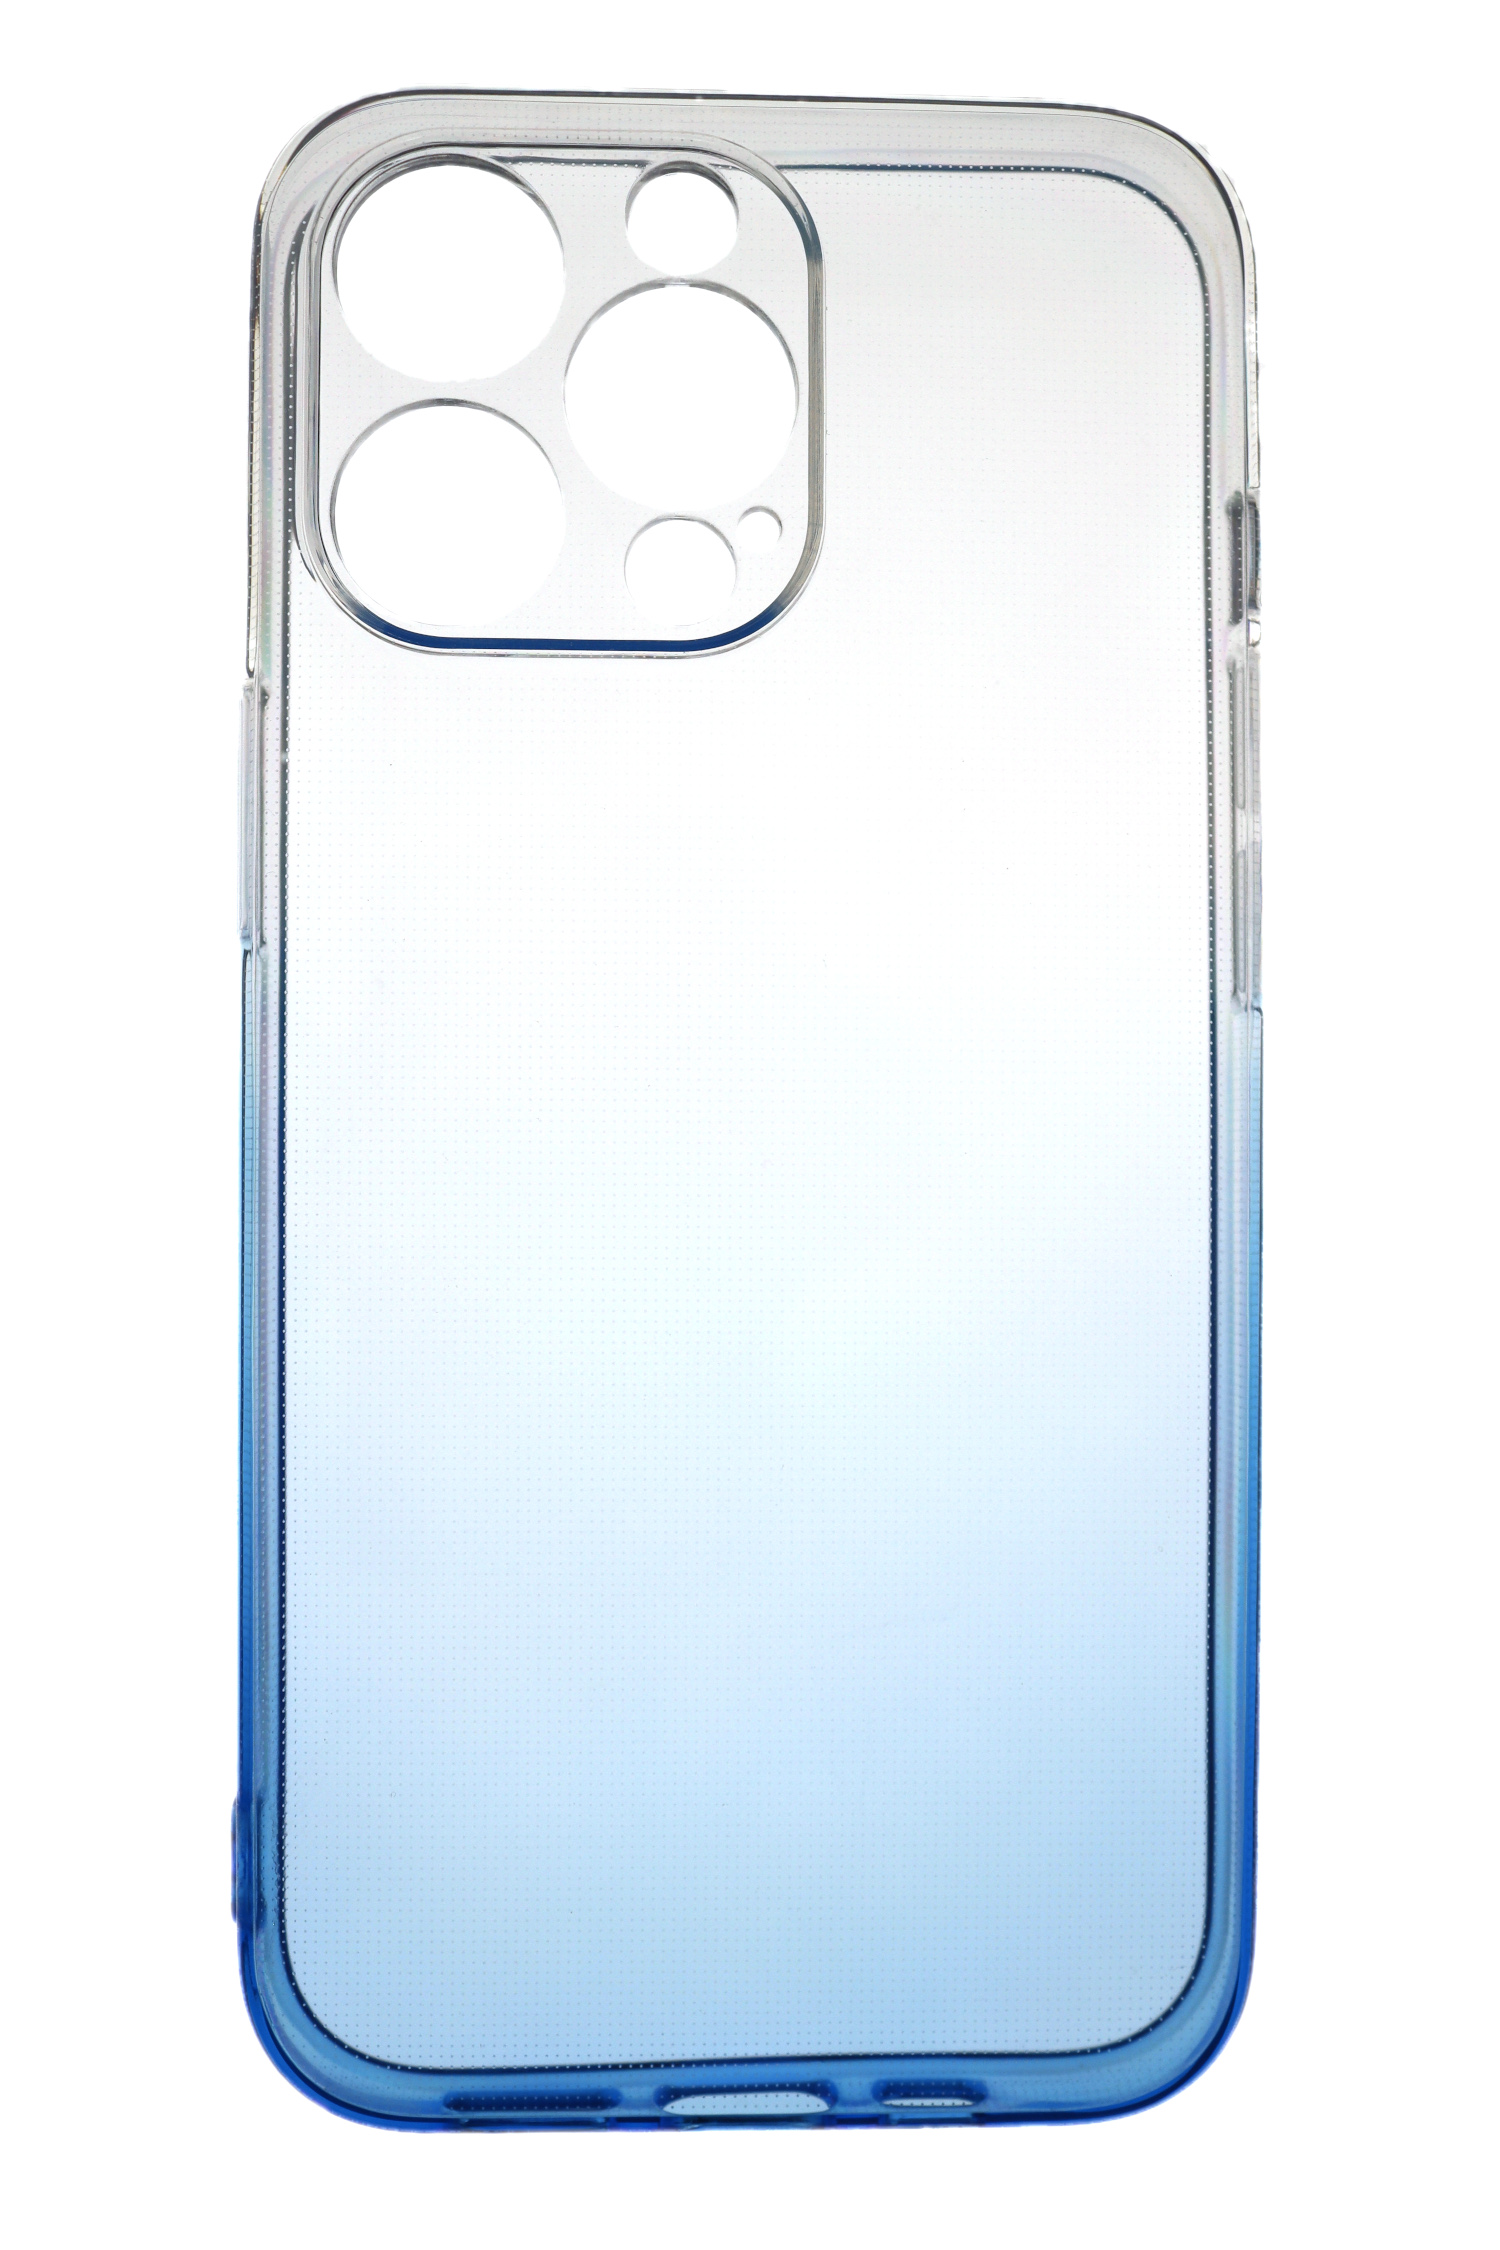 Strong, iPhone Backcover, mm JAMCOVER 13 Apple, Transparent 2.0 Blau, TPU Case Pro,